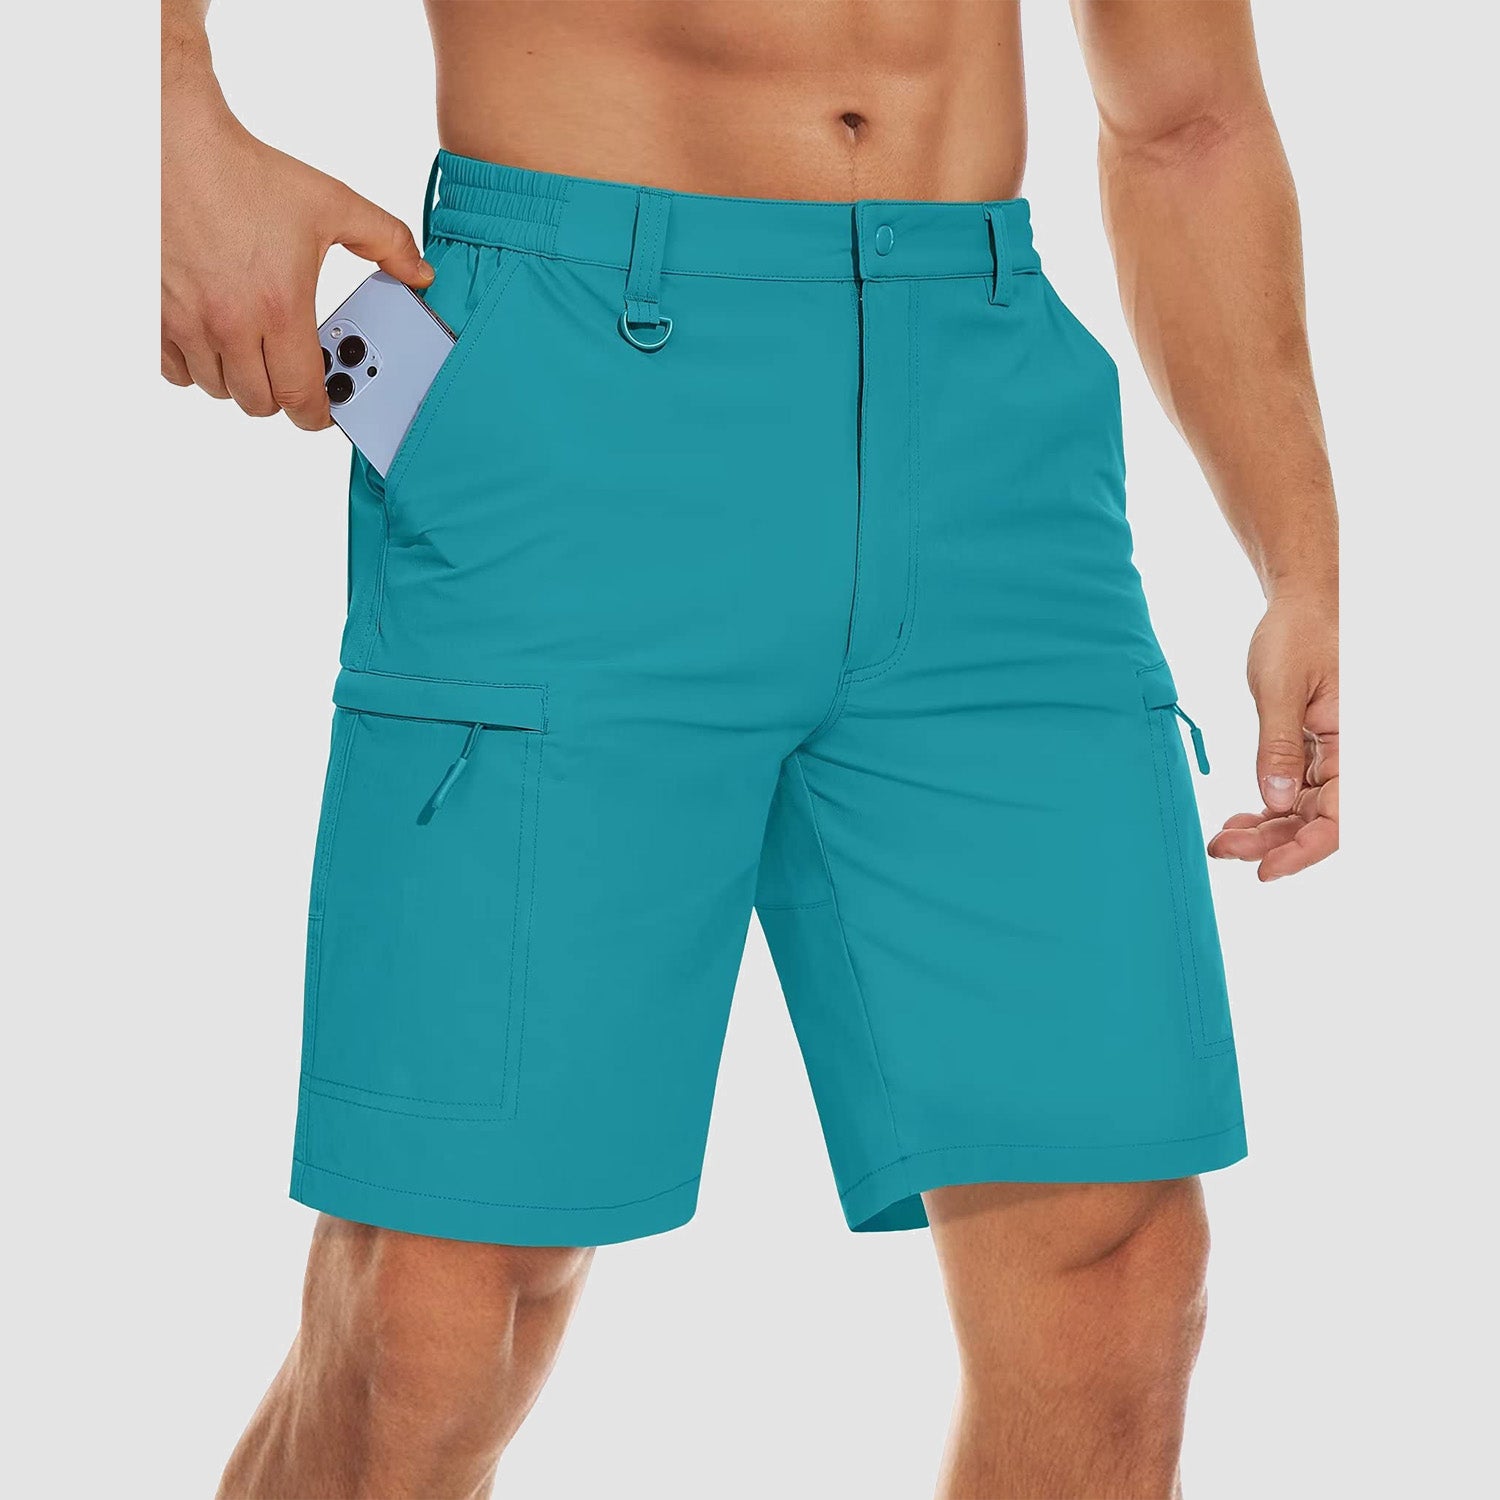 【Buy 4 Get the 4th Free!】Men's Hiking Shorts 5 Pockets Water-Resistant Ripstop Quick Dry Outdoor Shorts